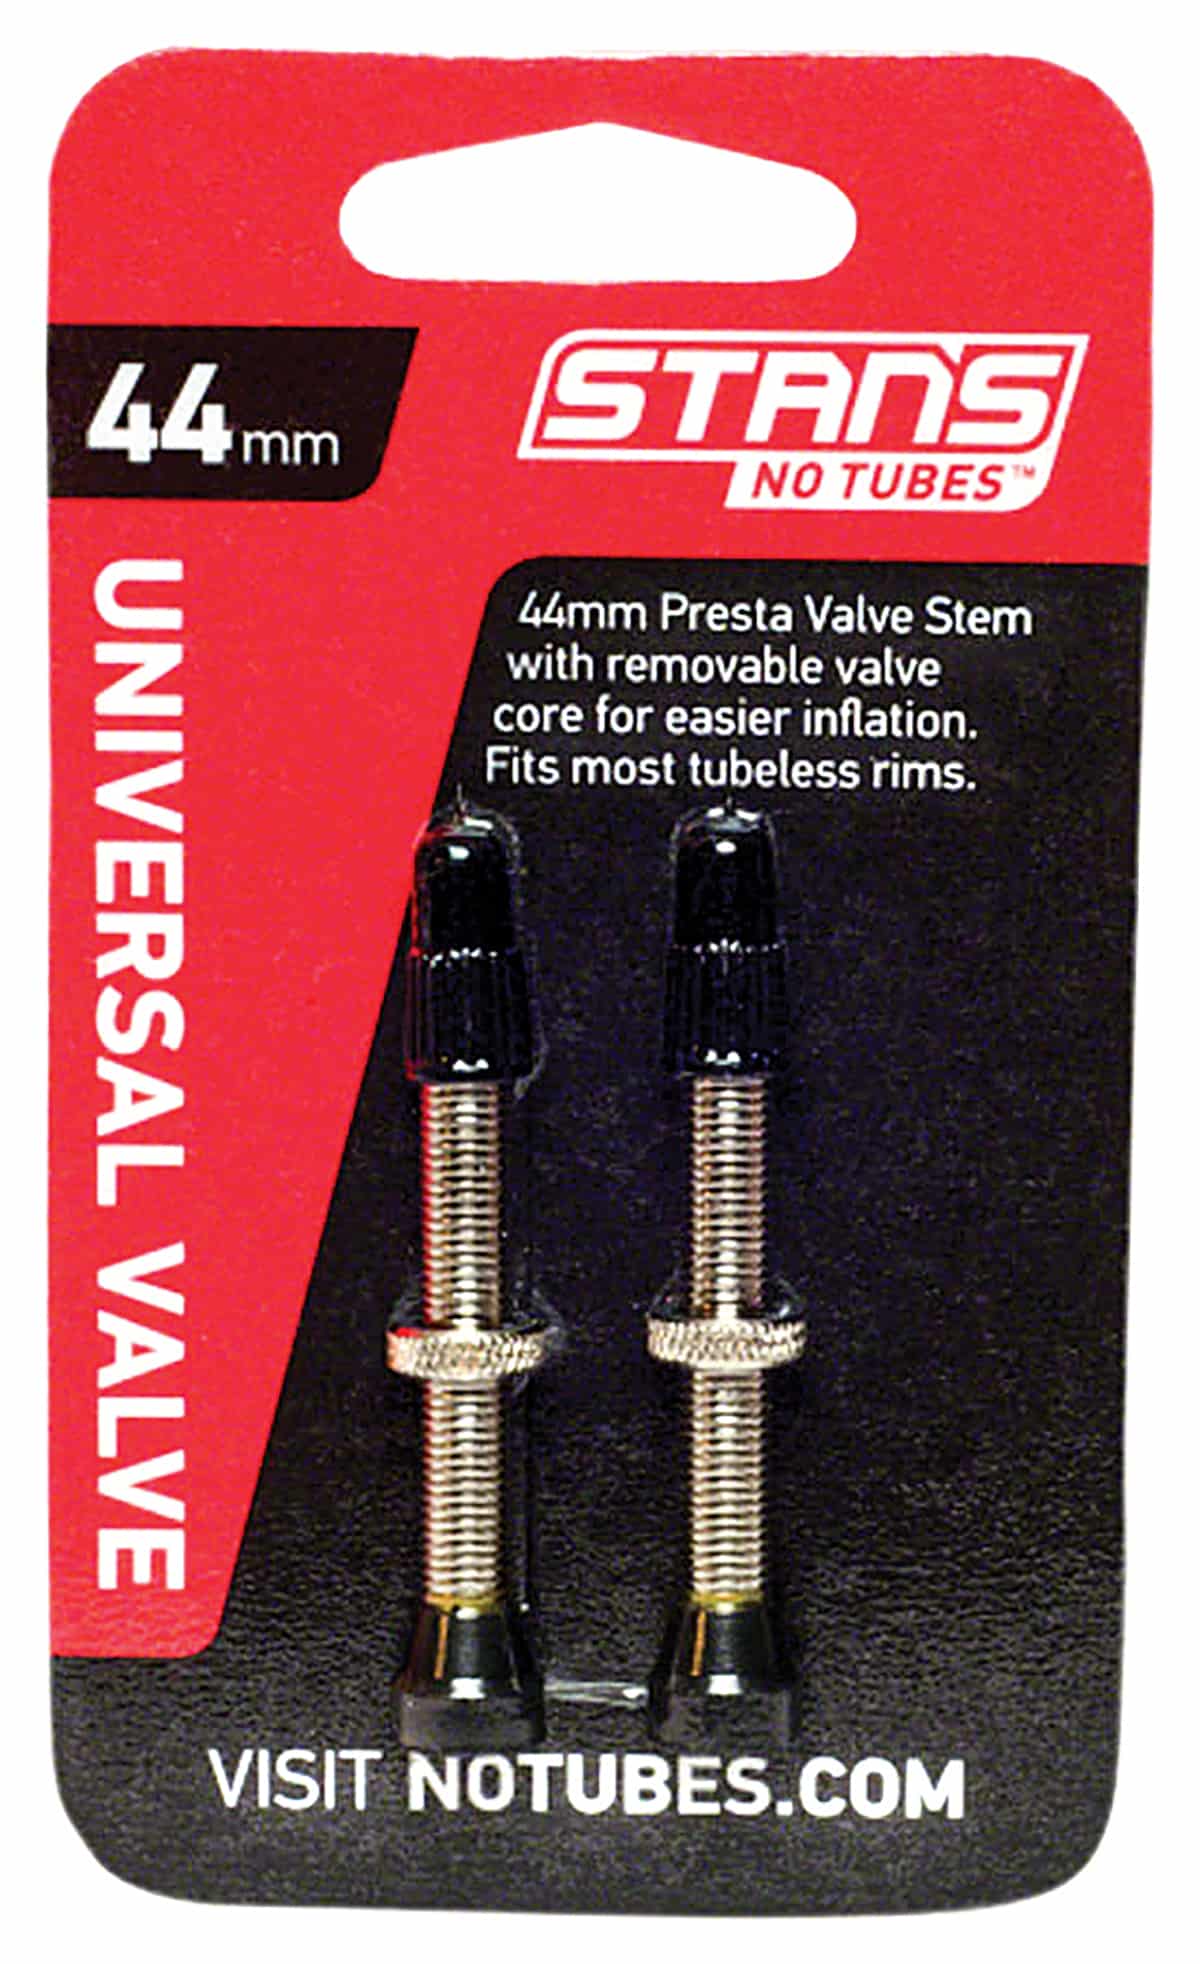 THE TEN BEST TUBELESS TIRE VALVE STEMS - AN UNDERRATED UPGRADE